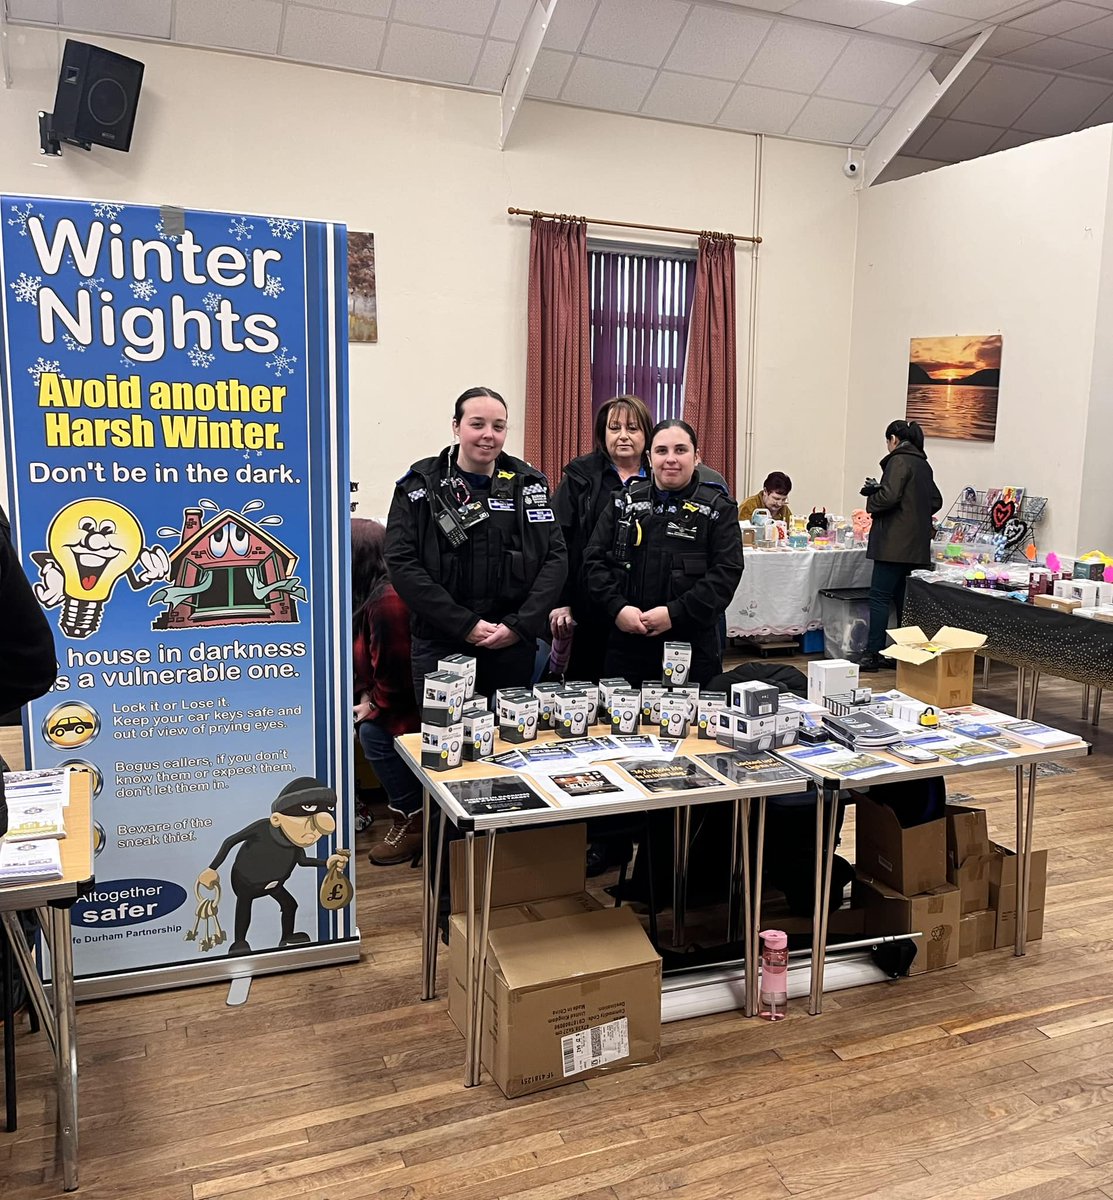 Our first winter nights roadshow kicked off at #Crook this morning with help from @DurhamCouncil & local PCSO's. Lots of residents attended and got chance to take away free equipment to help keep their homes safe. Keep an eye out for an event near you 👀 Lock it or lose it 🔐